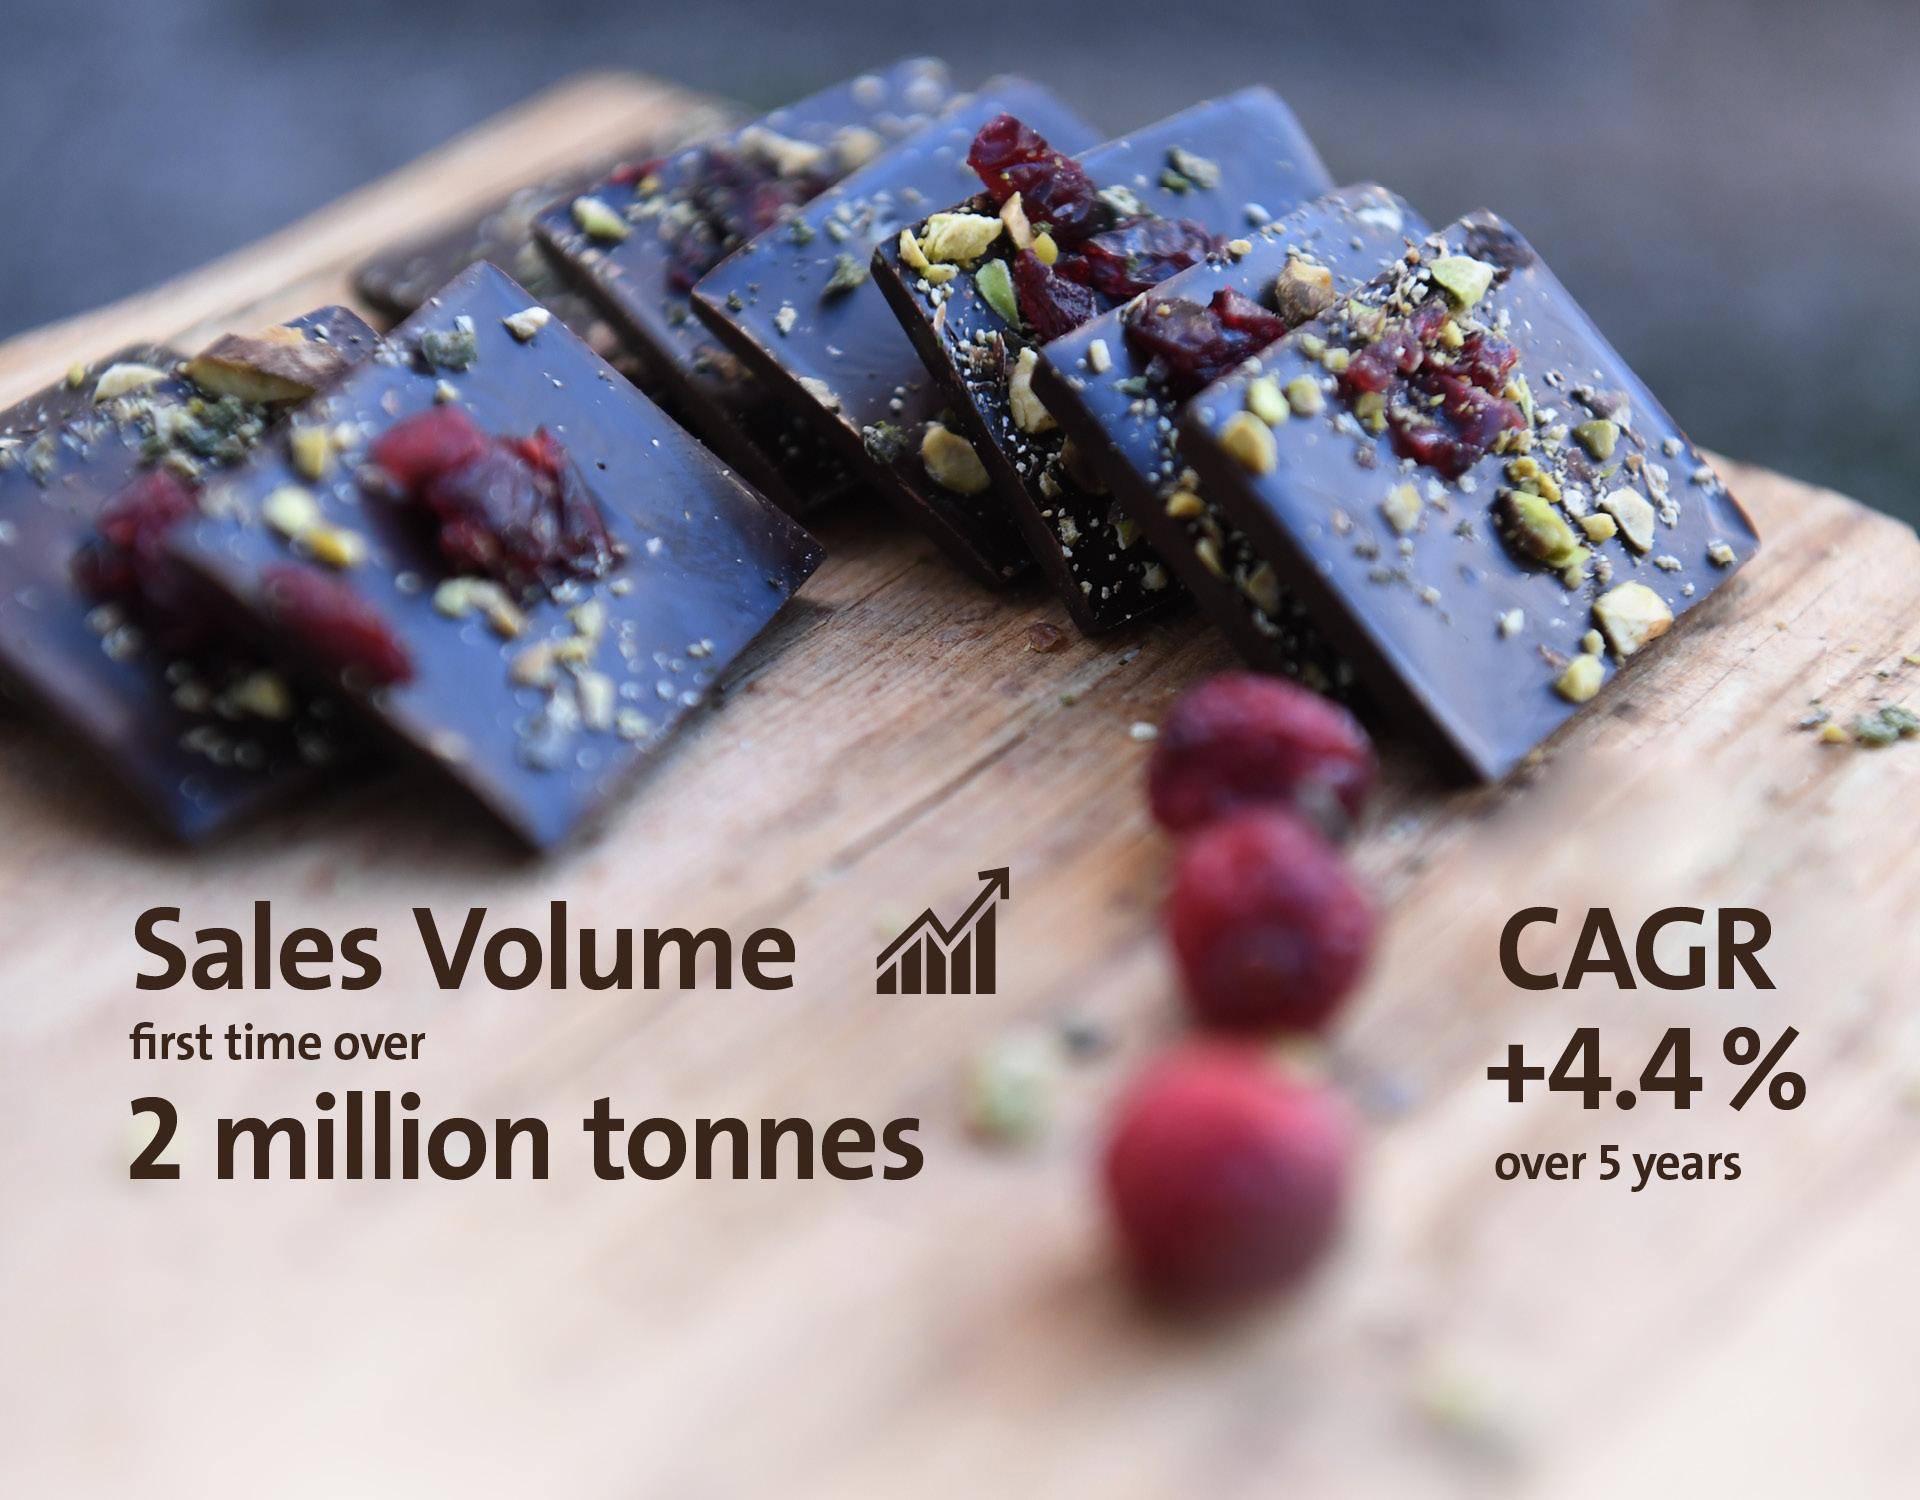 Image Slider Sales Volume Fiscal Year 2017/18 Barry Callebaut Group